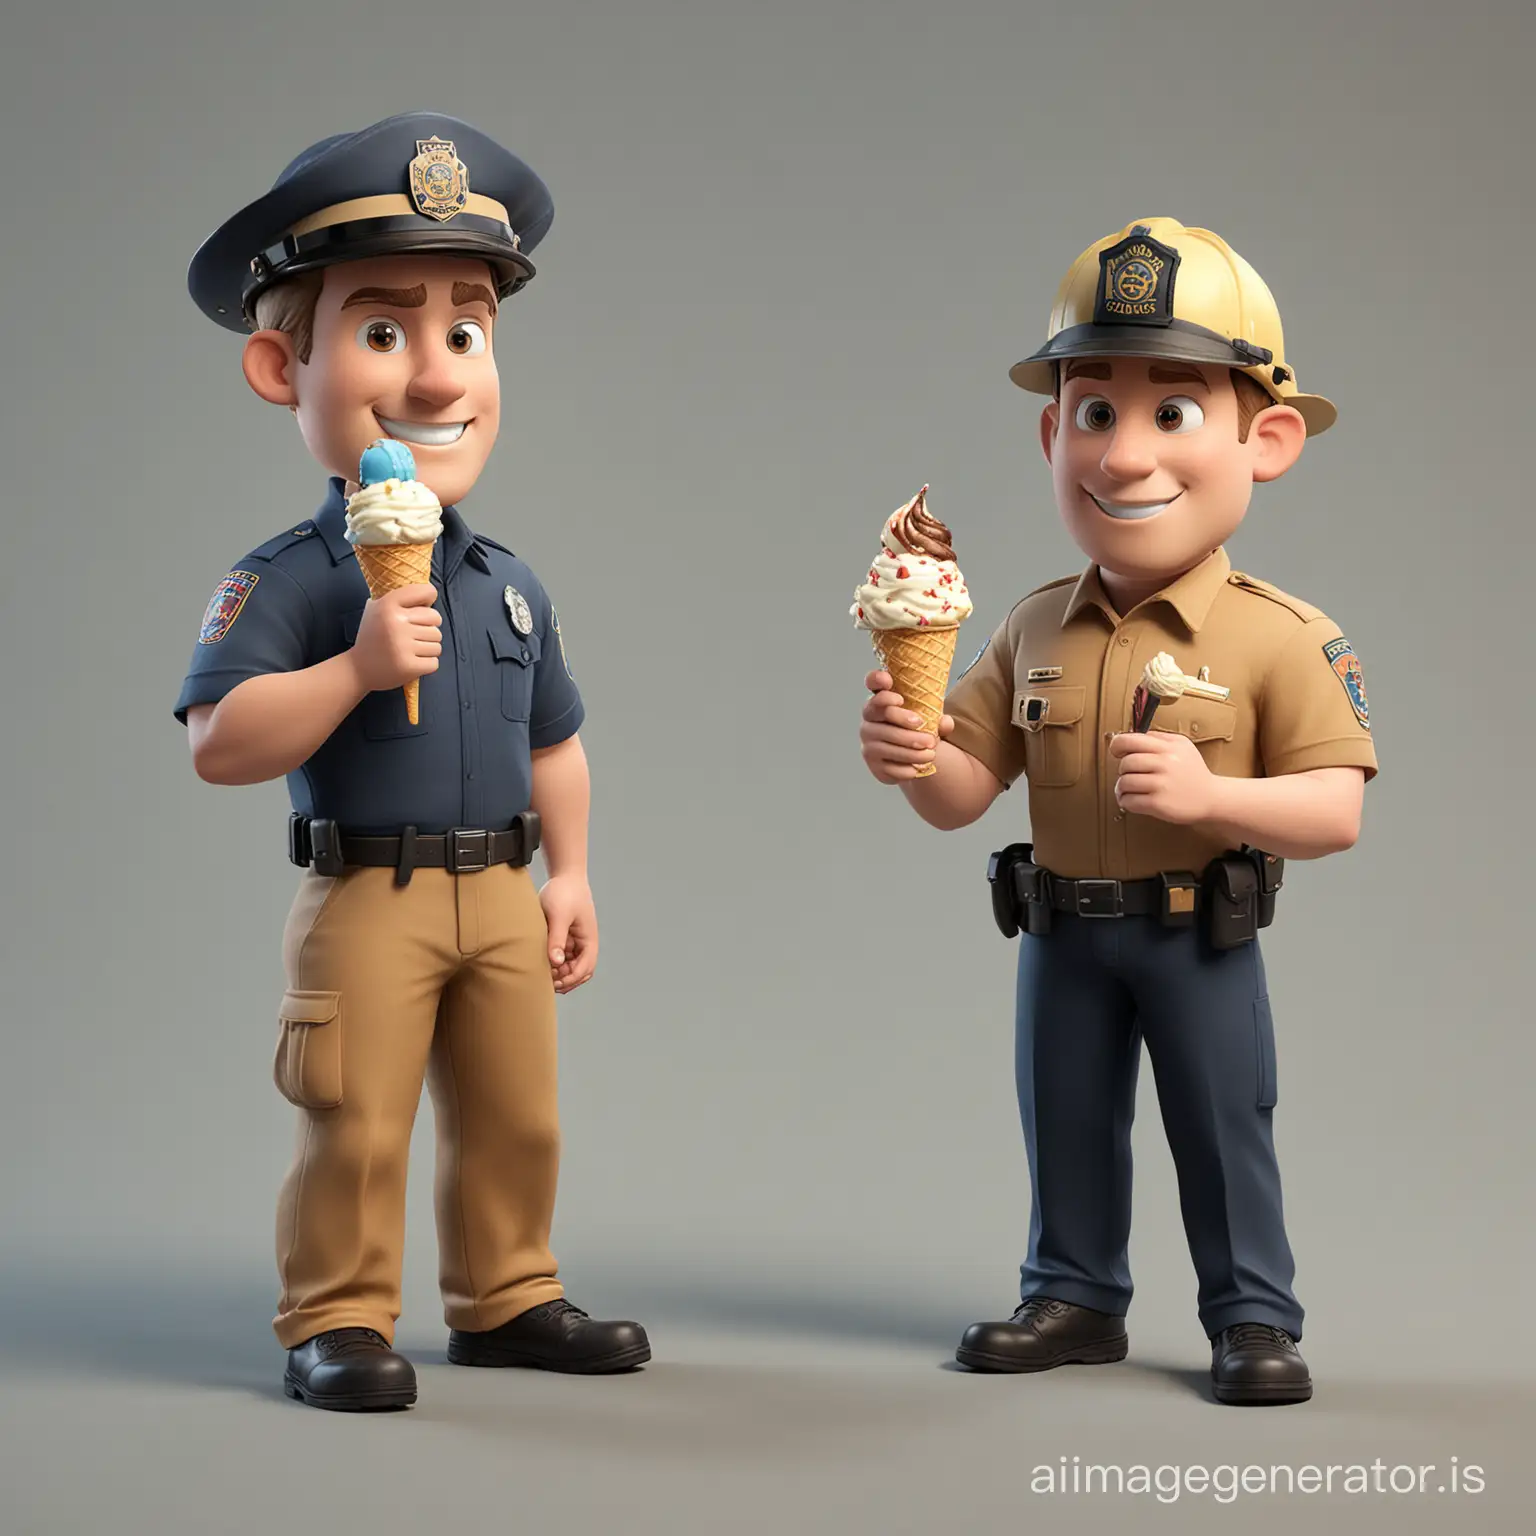 Firefighter-and-Policeman-Enjoy-Ice-Cream-Together